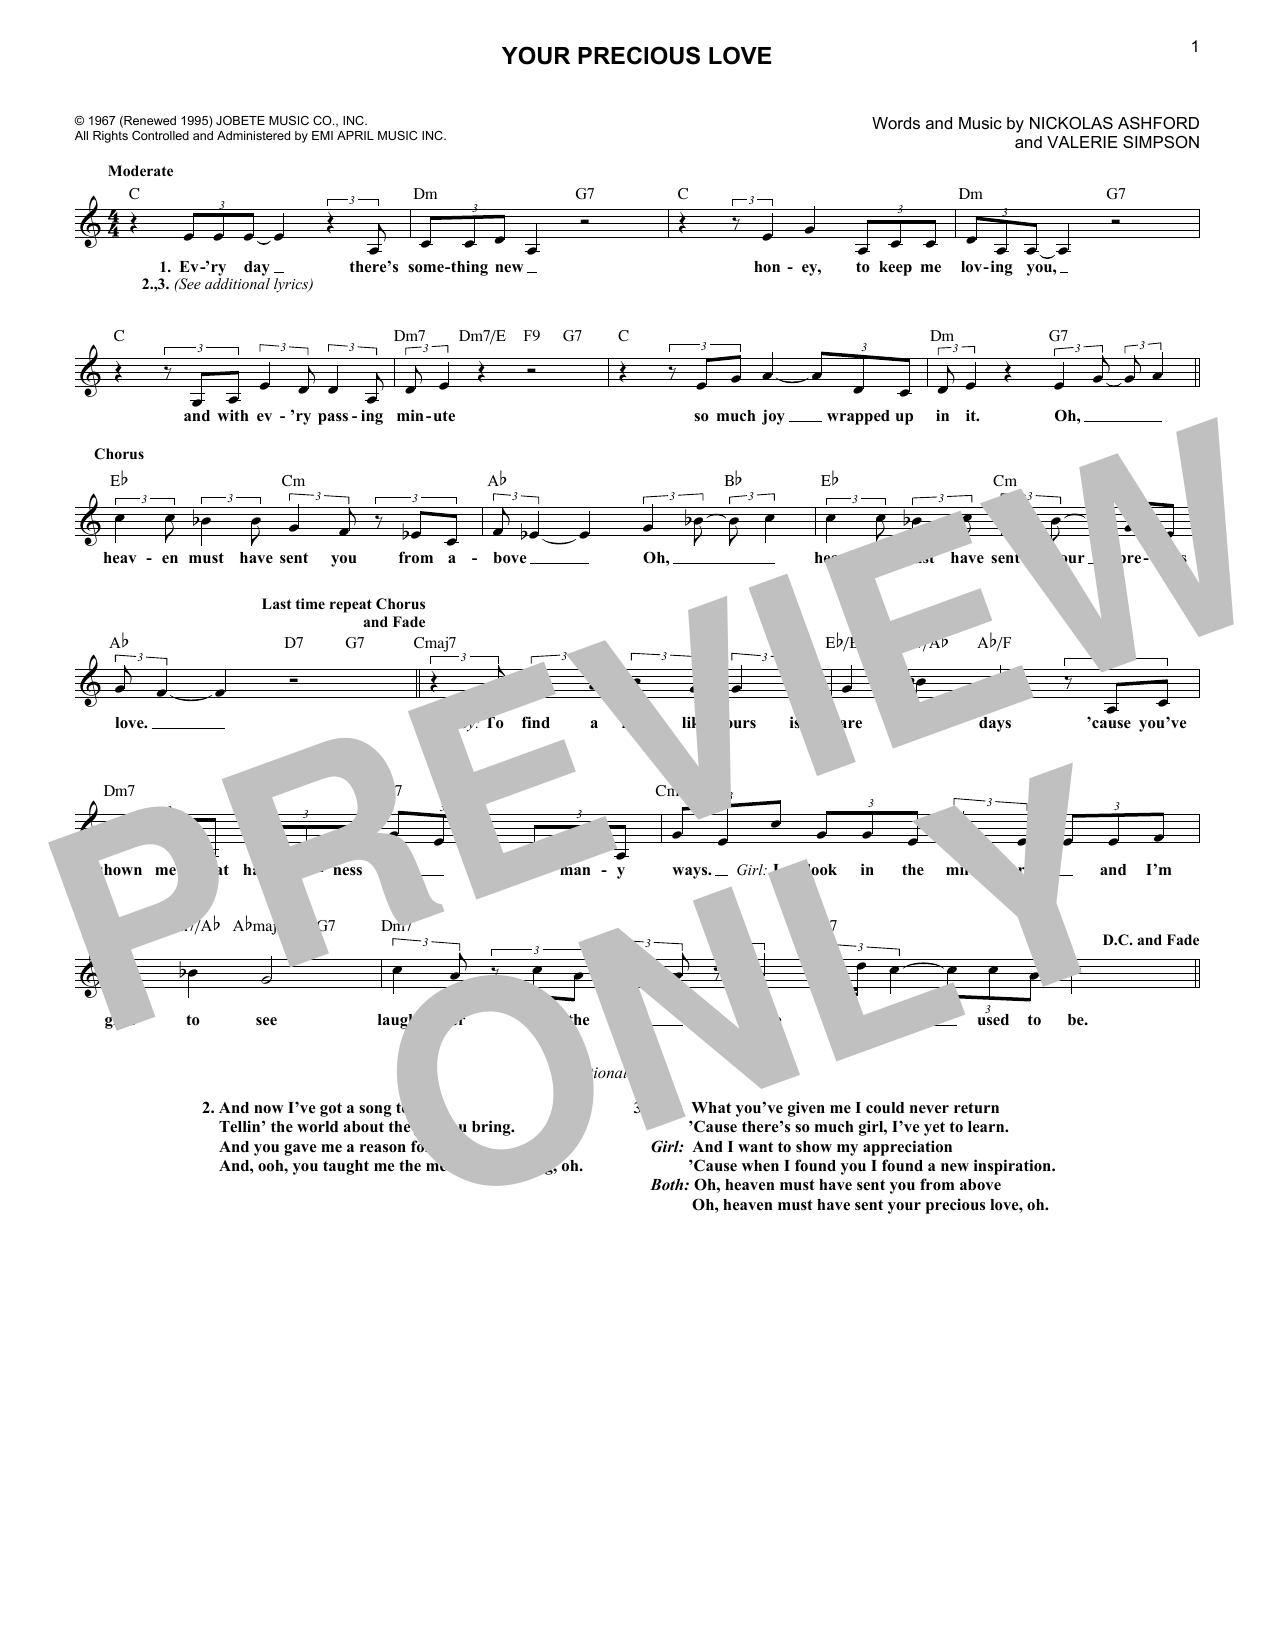 Download Marvin Gaye & Tammi Terrell Your Precious Love Sheet Music